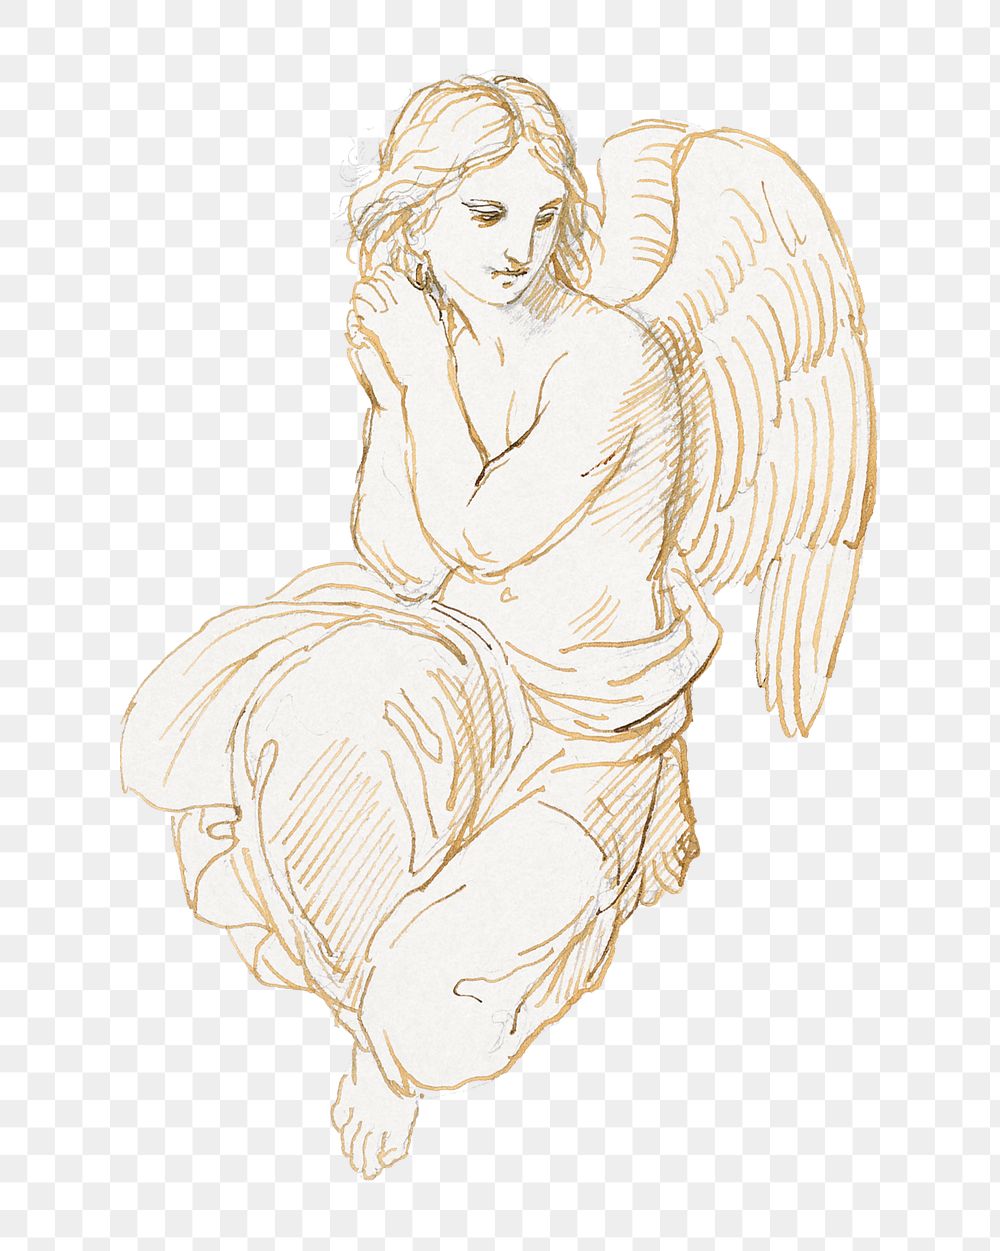  Angel sketch  png transparent background. Remixed by rawpixel.